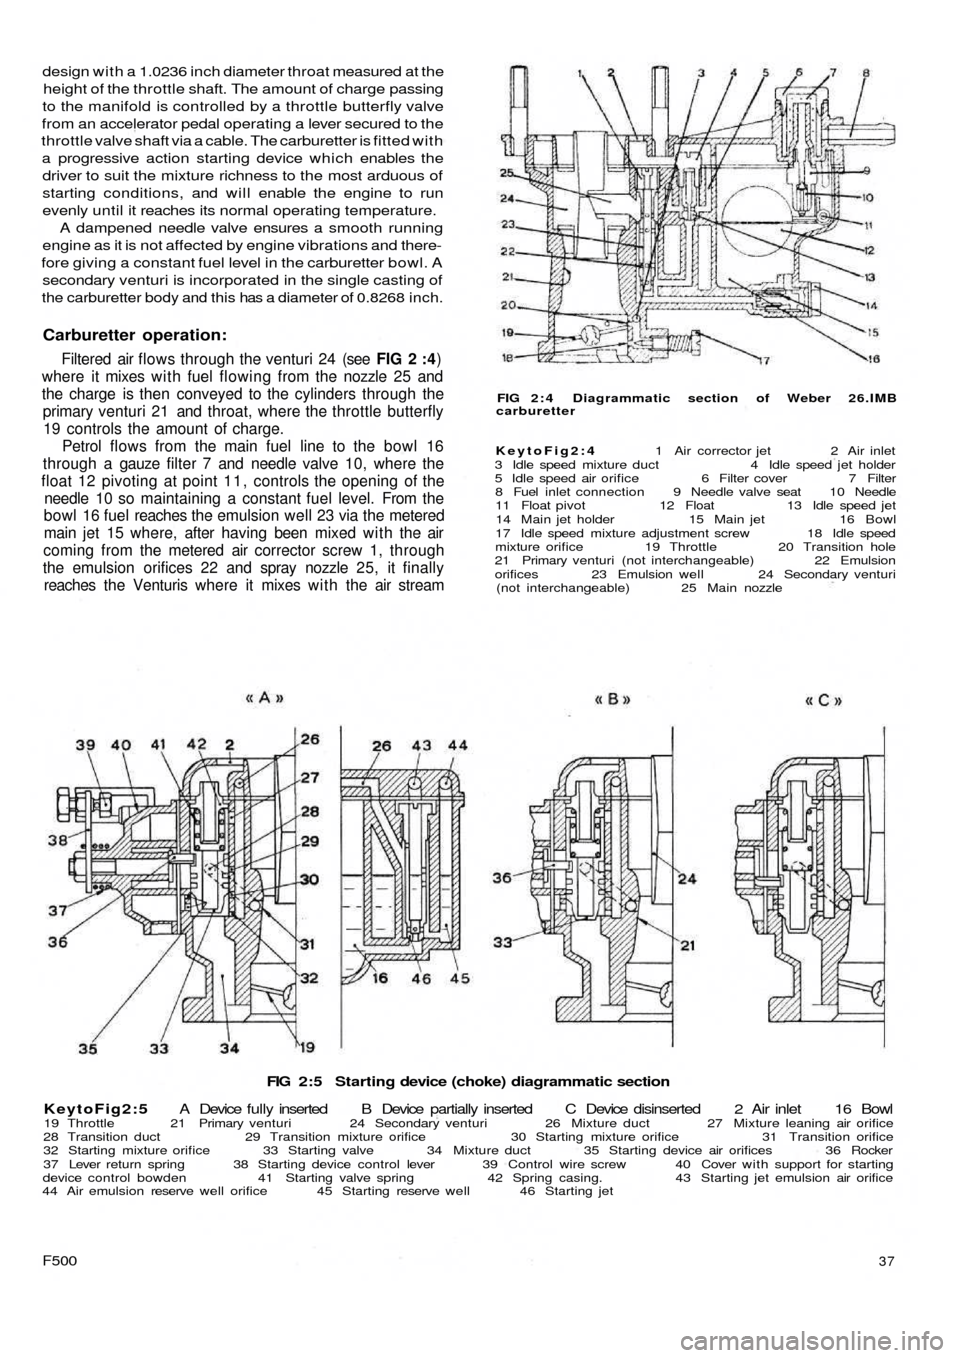 FIAT 500 1959 1.G Workshop Manual FIG 2:5  Starting device (choke) diagrammatic section
KeytoFig2:5 A  Device  fully inserted  B  Device  partially  inserted  C  Device  disinserted  2  Air  inlet 16 Bowl
19 Throttle  21 Primary ventu